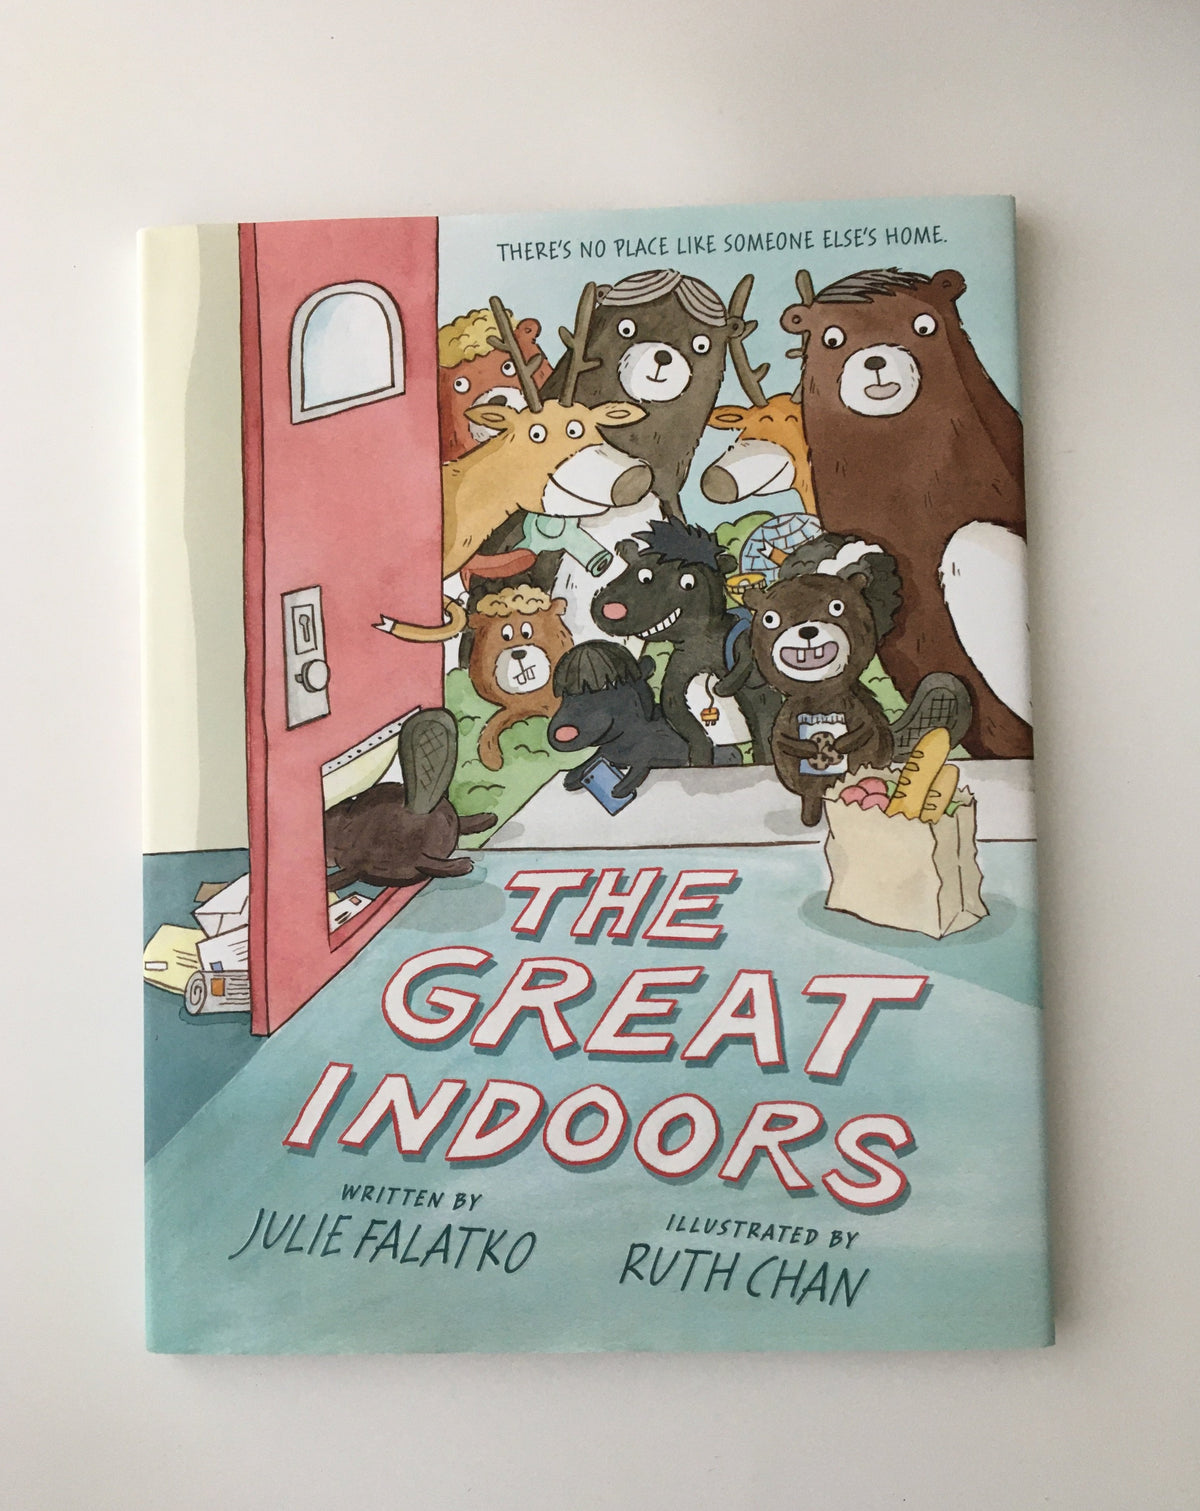 The Great Indoors by Julie Falatko